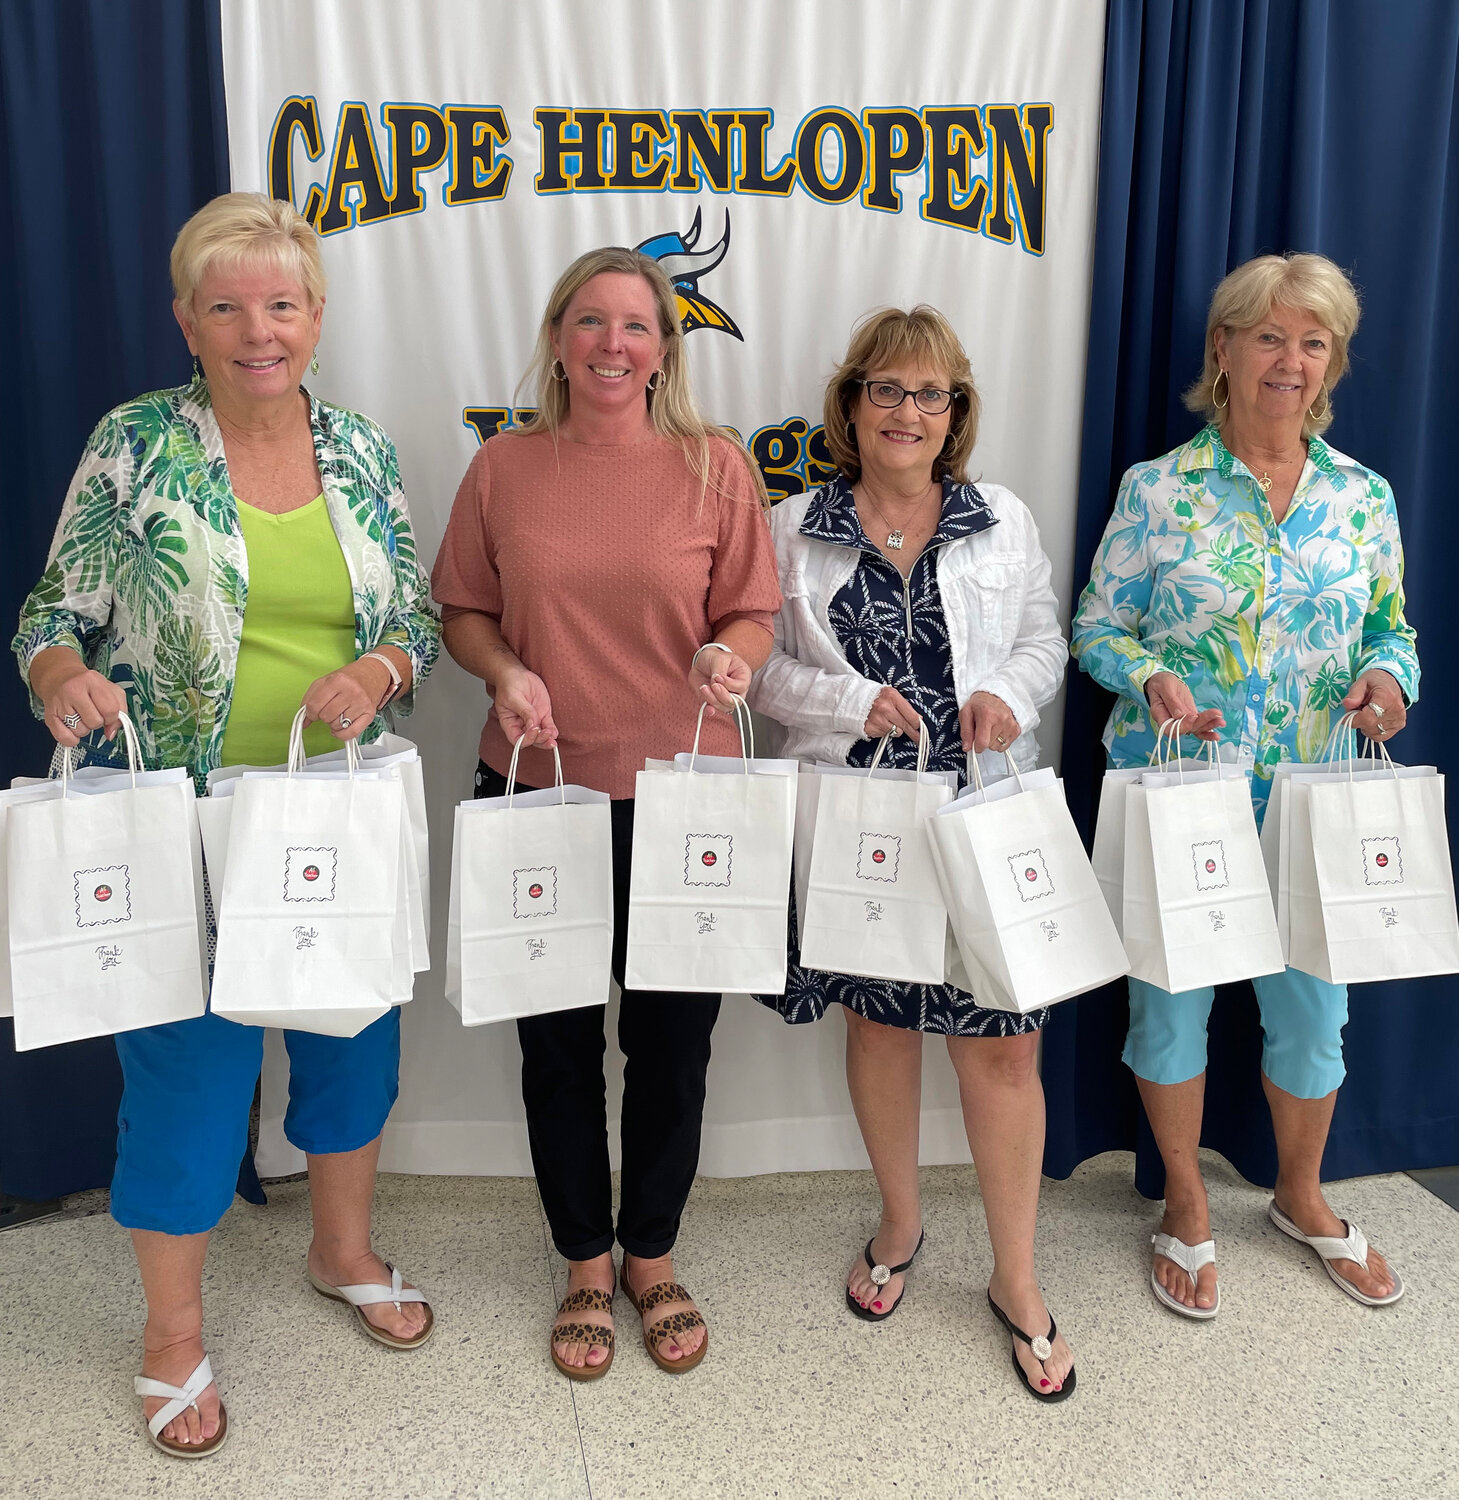 Cape Henlopen High School Principal Kristen DeGregory accepted gifts for new staff. From left, Diane Baerveldt, DeGregory, Kathy Jacobs and Lin Waggoner.